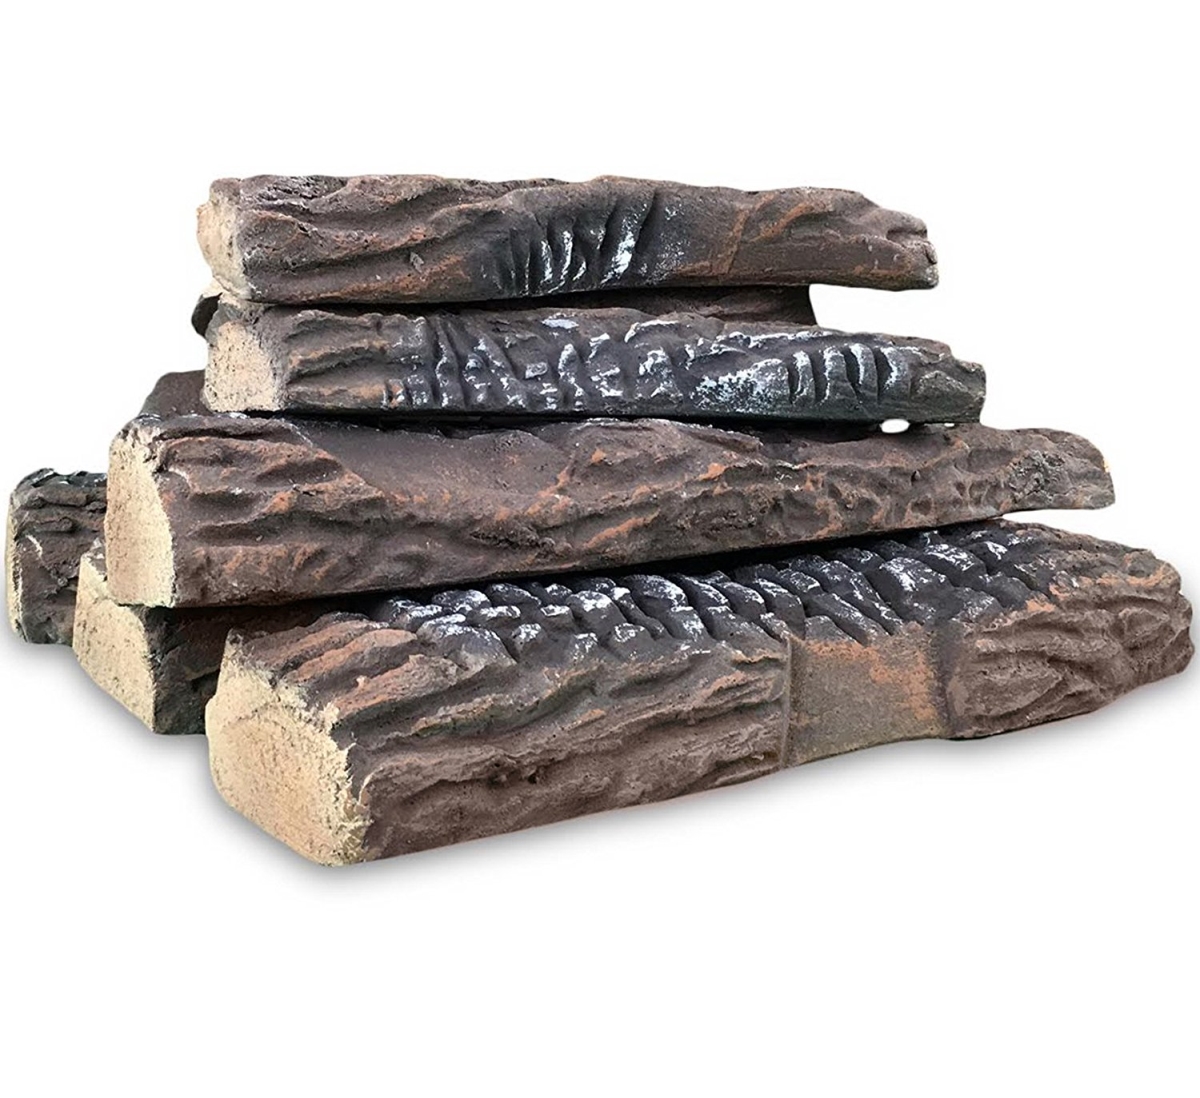 Picture of Moda Flame RFA3010-MF Ceramic Wood Large Gas Fireplace Logs - 10 Piece